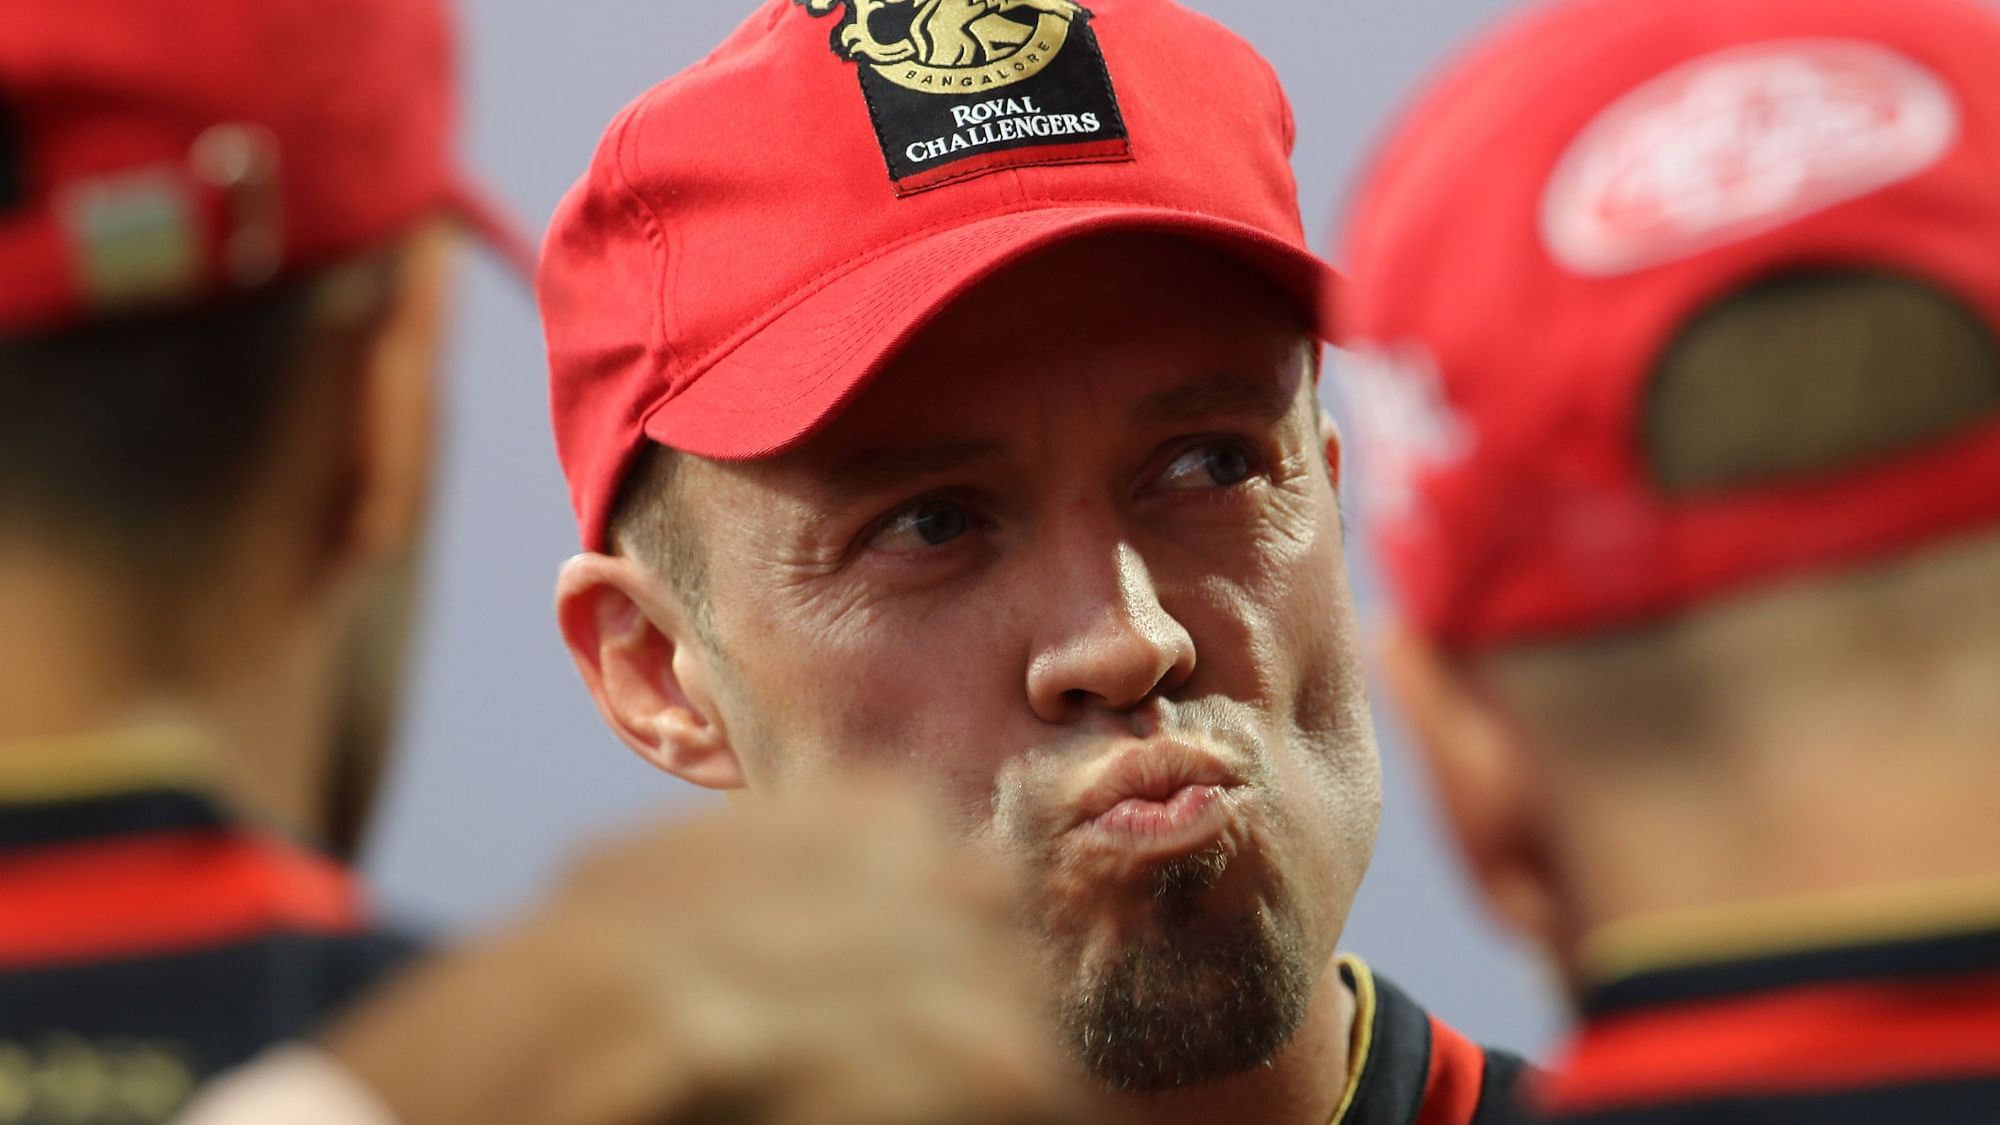 RCB’s AB de Villiers said ‘it’s getting boring to talk about it (the IPL title)‘.